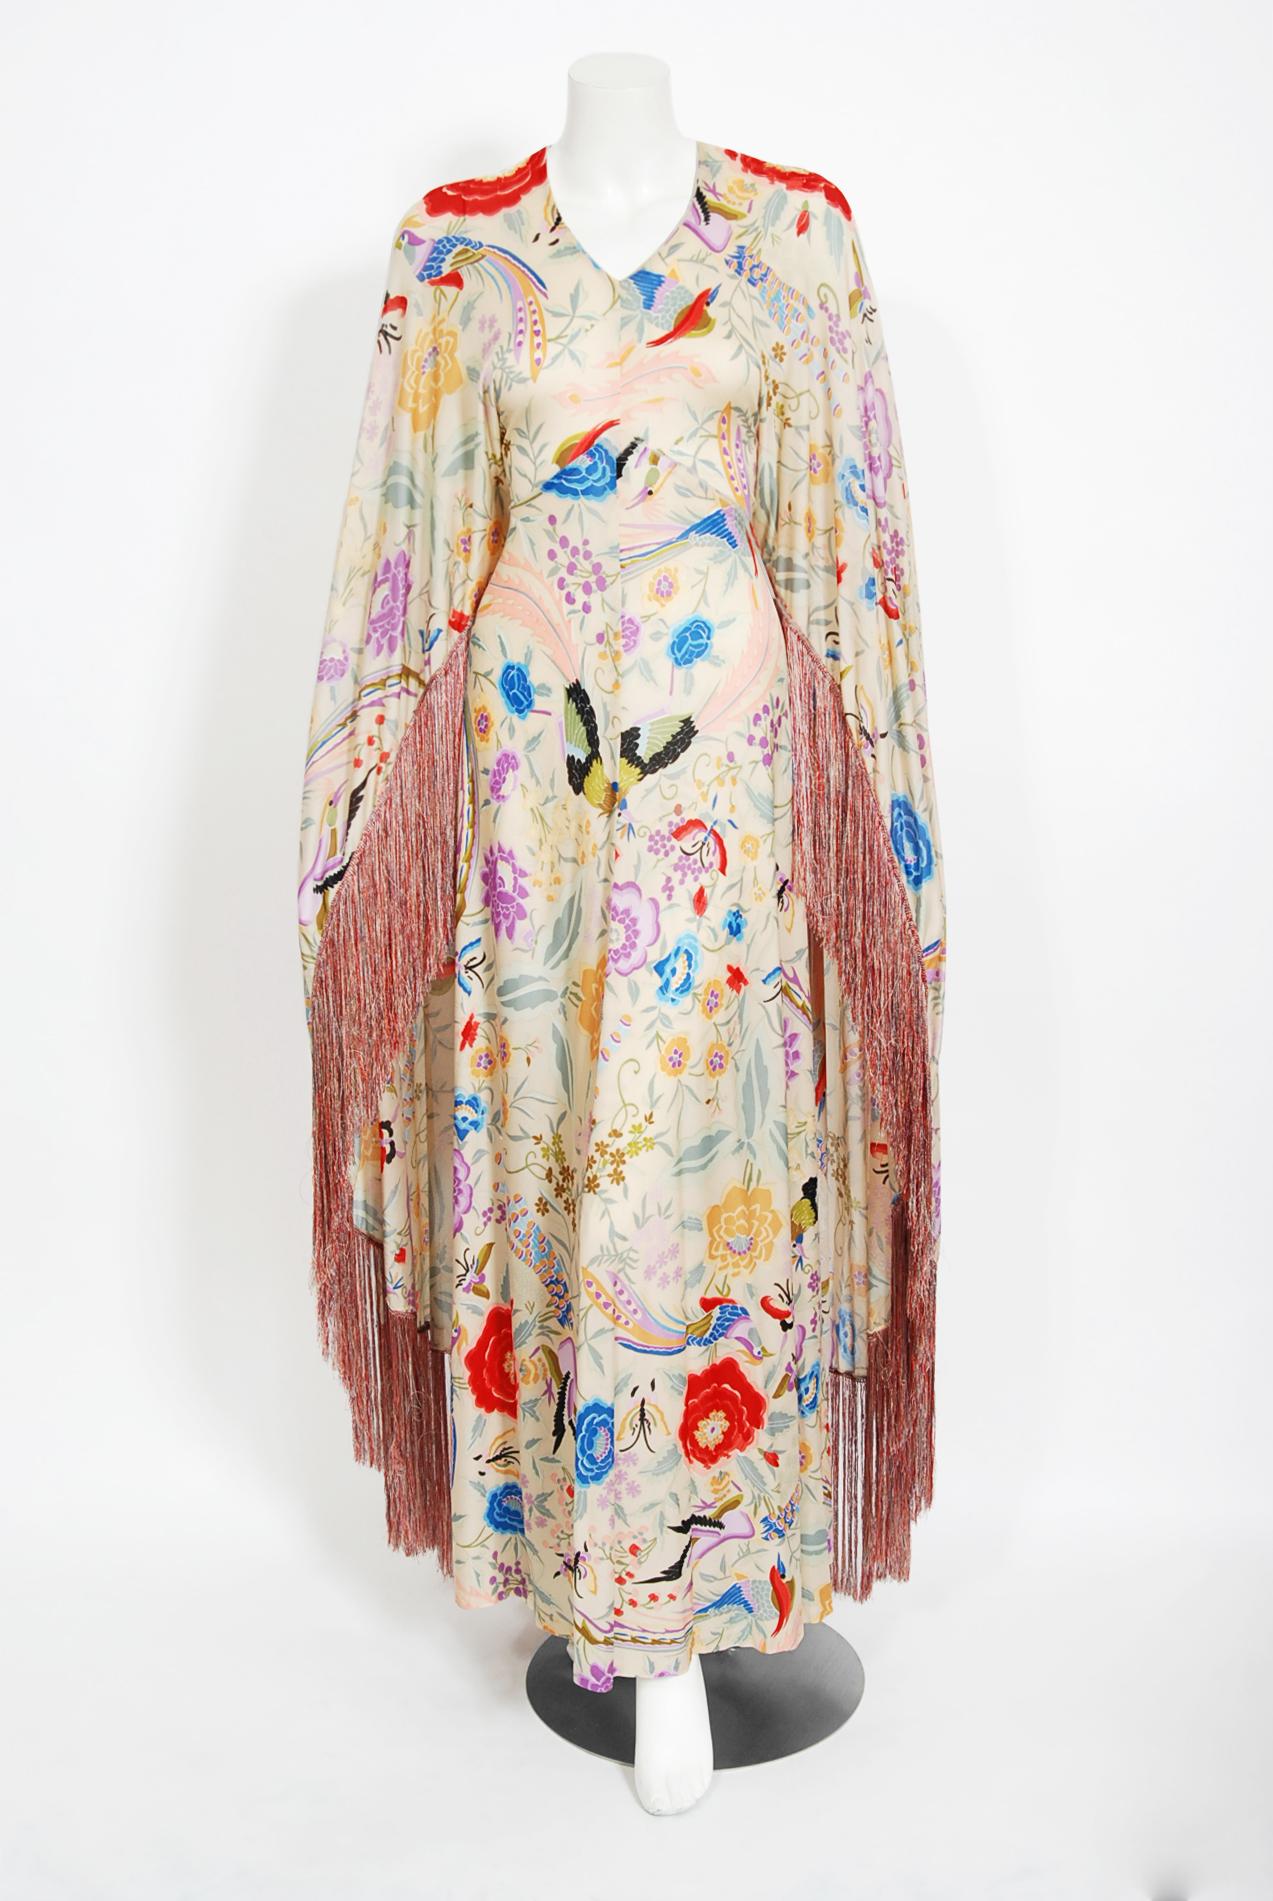 Breathtaking Missoni Couture documented iconic cream floral bird garden print caftan gown from their 1971 iconic collection. Redefining an entire genre of fashion, the 1970's were seen as Missoni's launch to fame as the bohemian chic trends